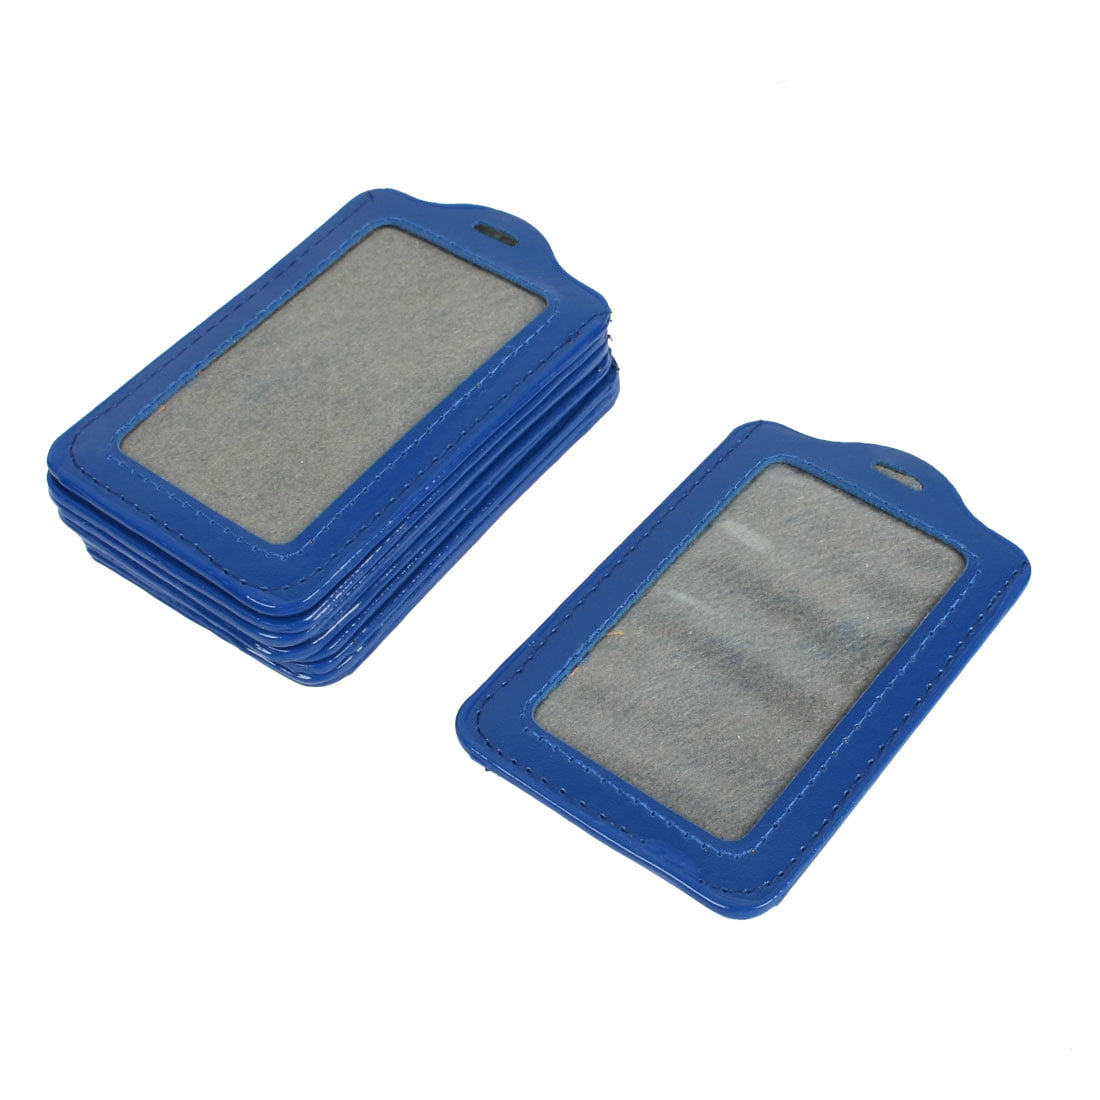 Vertical Design Faux Leather Business Card Holders Blue Clear 10 Pieces 